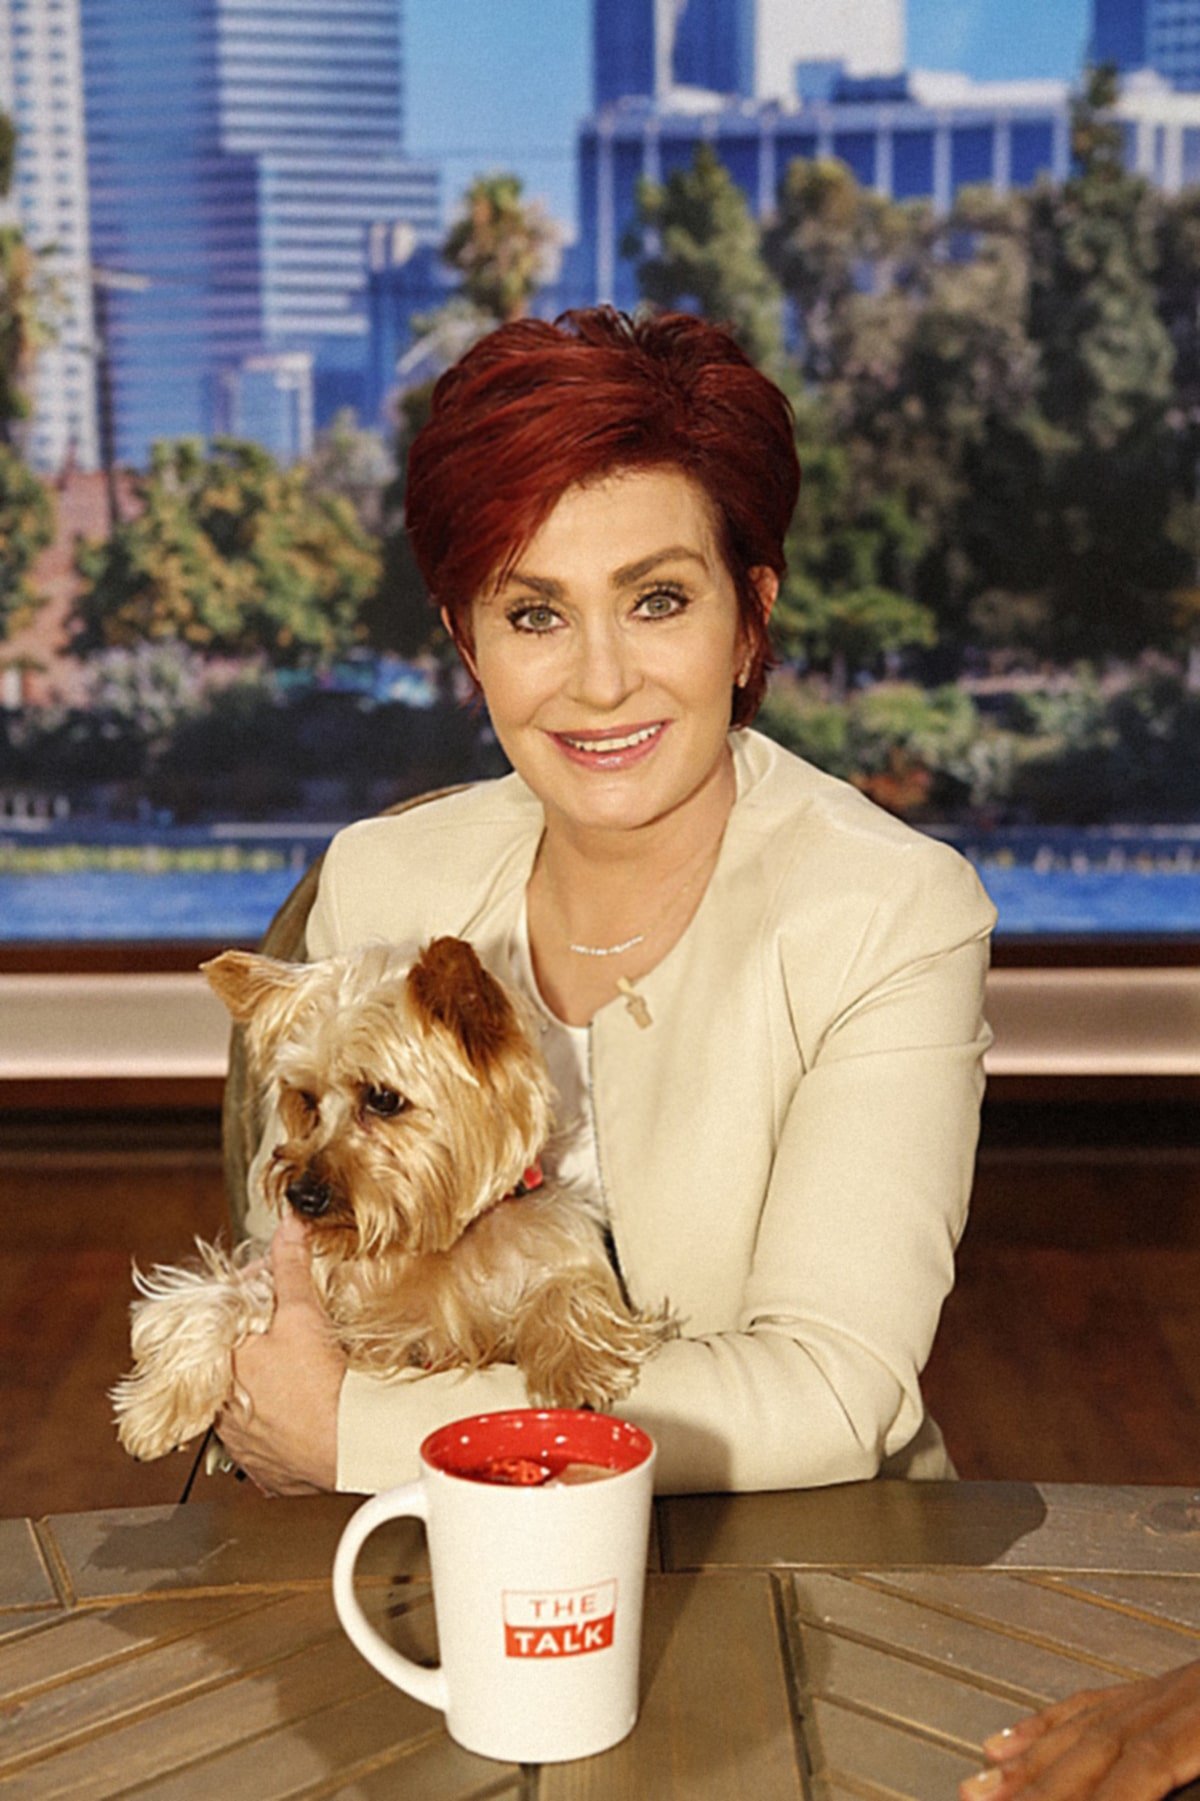 THE TALK, (from left): co-host Sharon Osbourne with her dog, Charlie